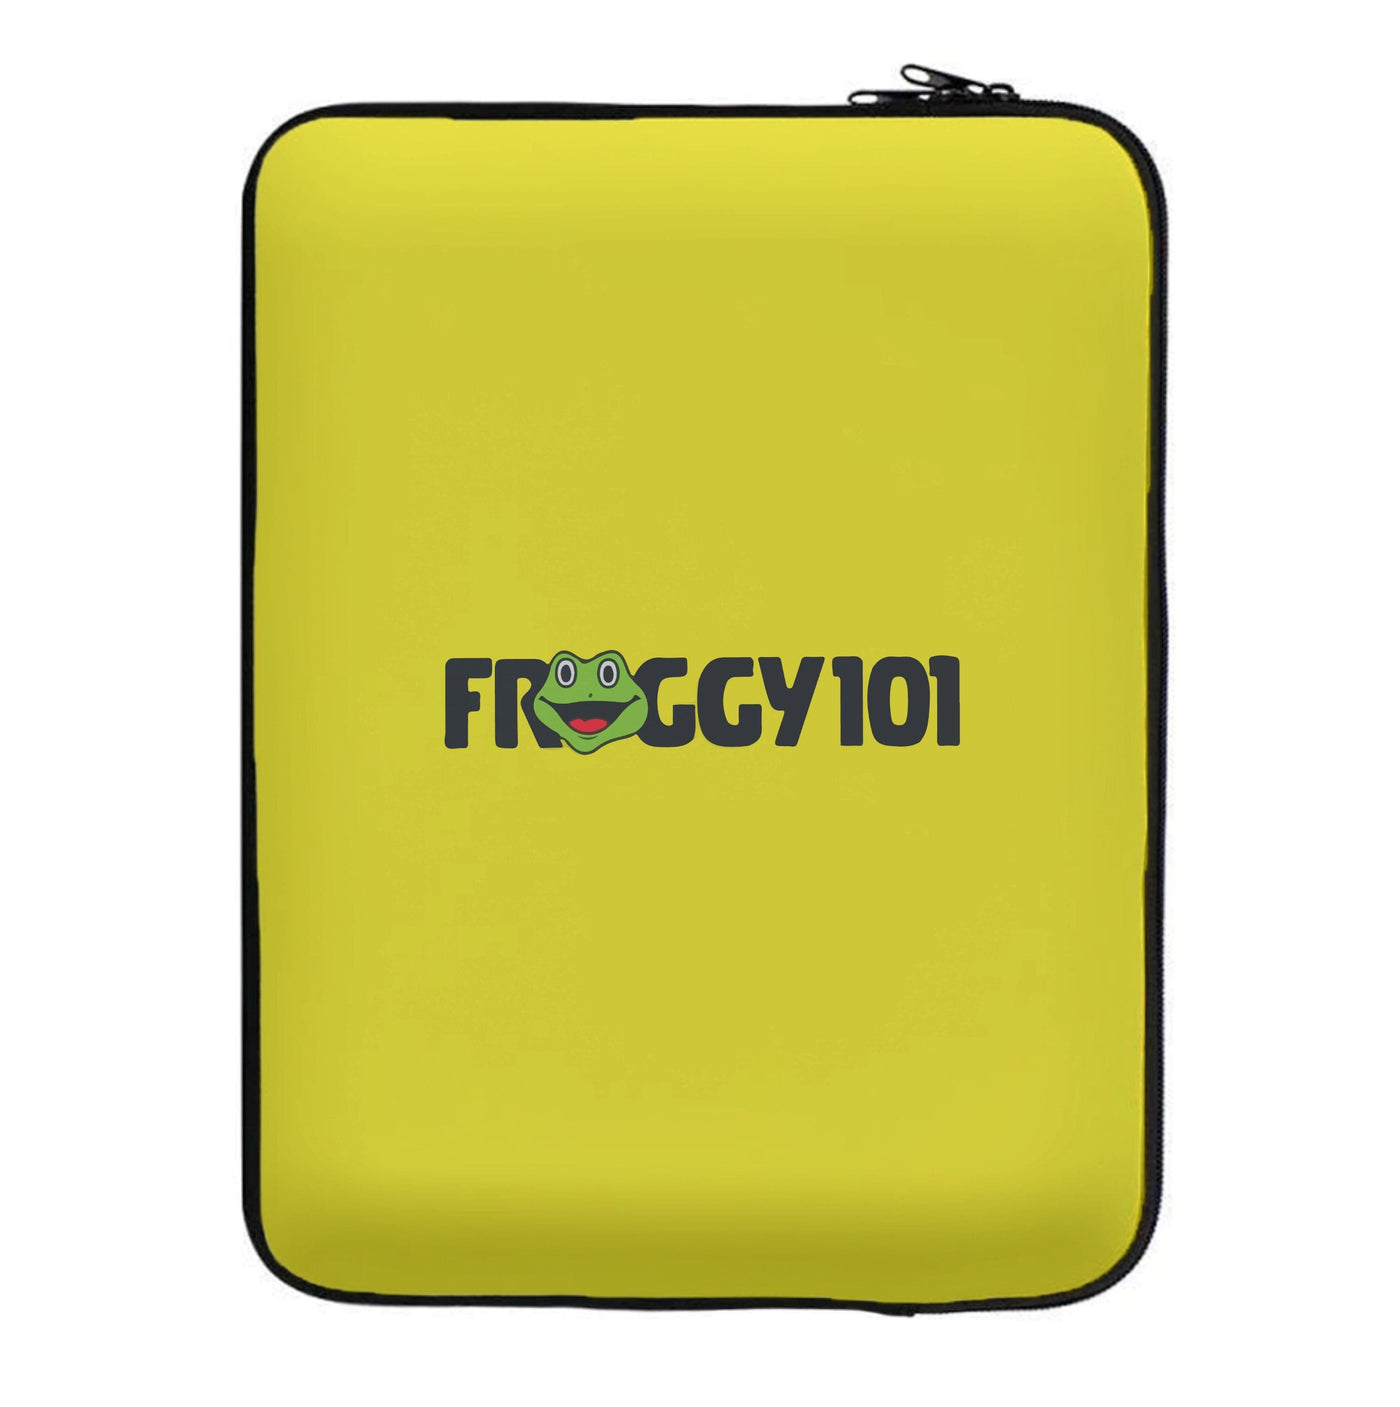 Froggy 101 - The Office Laptop Sleeve